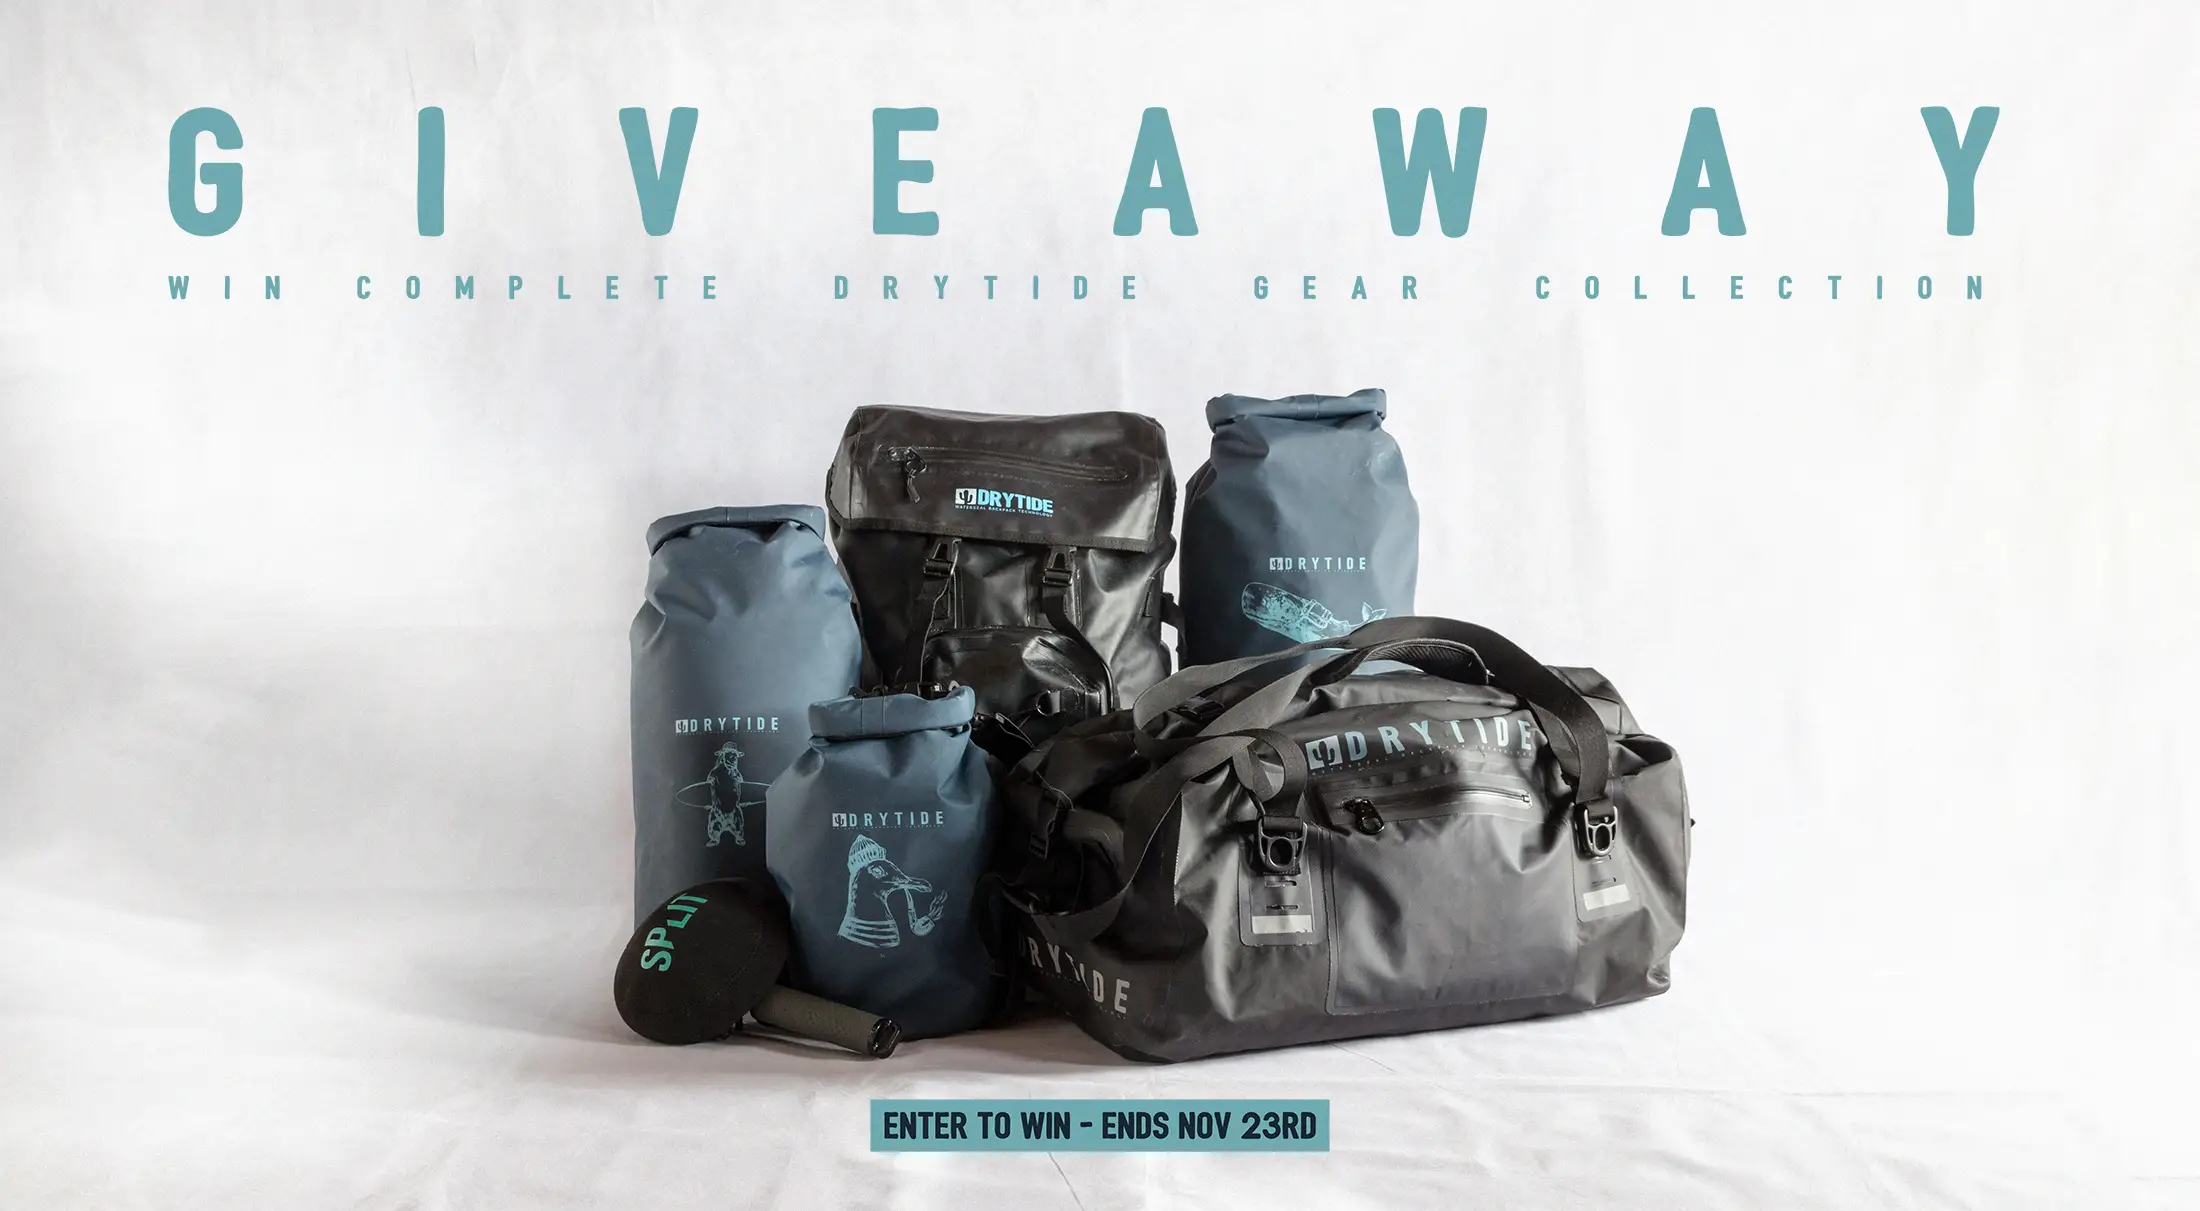 DryTide is giving away a complete collection of @DryTideGear waterproof bags and backpacks and a Split dome port for your GoPro to top it off. #giveaway #giveawayalert The company was started to produce the perfect waterproof backpack for adventure and travel. Instagram: Follow @drytide and like the giveaway post and tag 2 friends in the comments (every additional is +1 entry) Enter your email on the website for and additional 5 entries Official Rules: Worldwide, 18+. November 13 - November 23, 2020. One entry per person. Prize (1): DryTide 50L waterproof backpack, DryTide 50L waterproof duffel, DryTide 30L, 15L and 5L dry bag pack and Split dome port for GoPro. ARV: $300